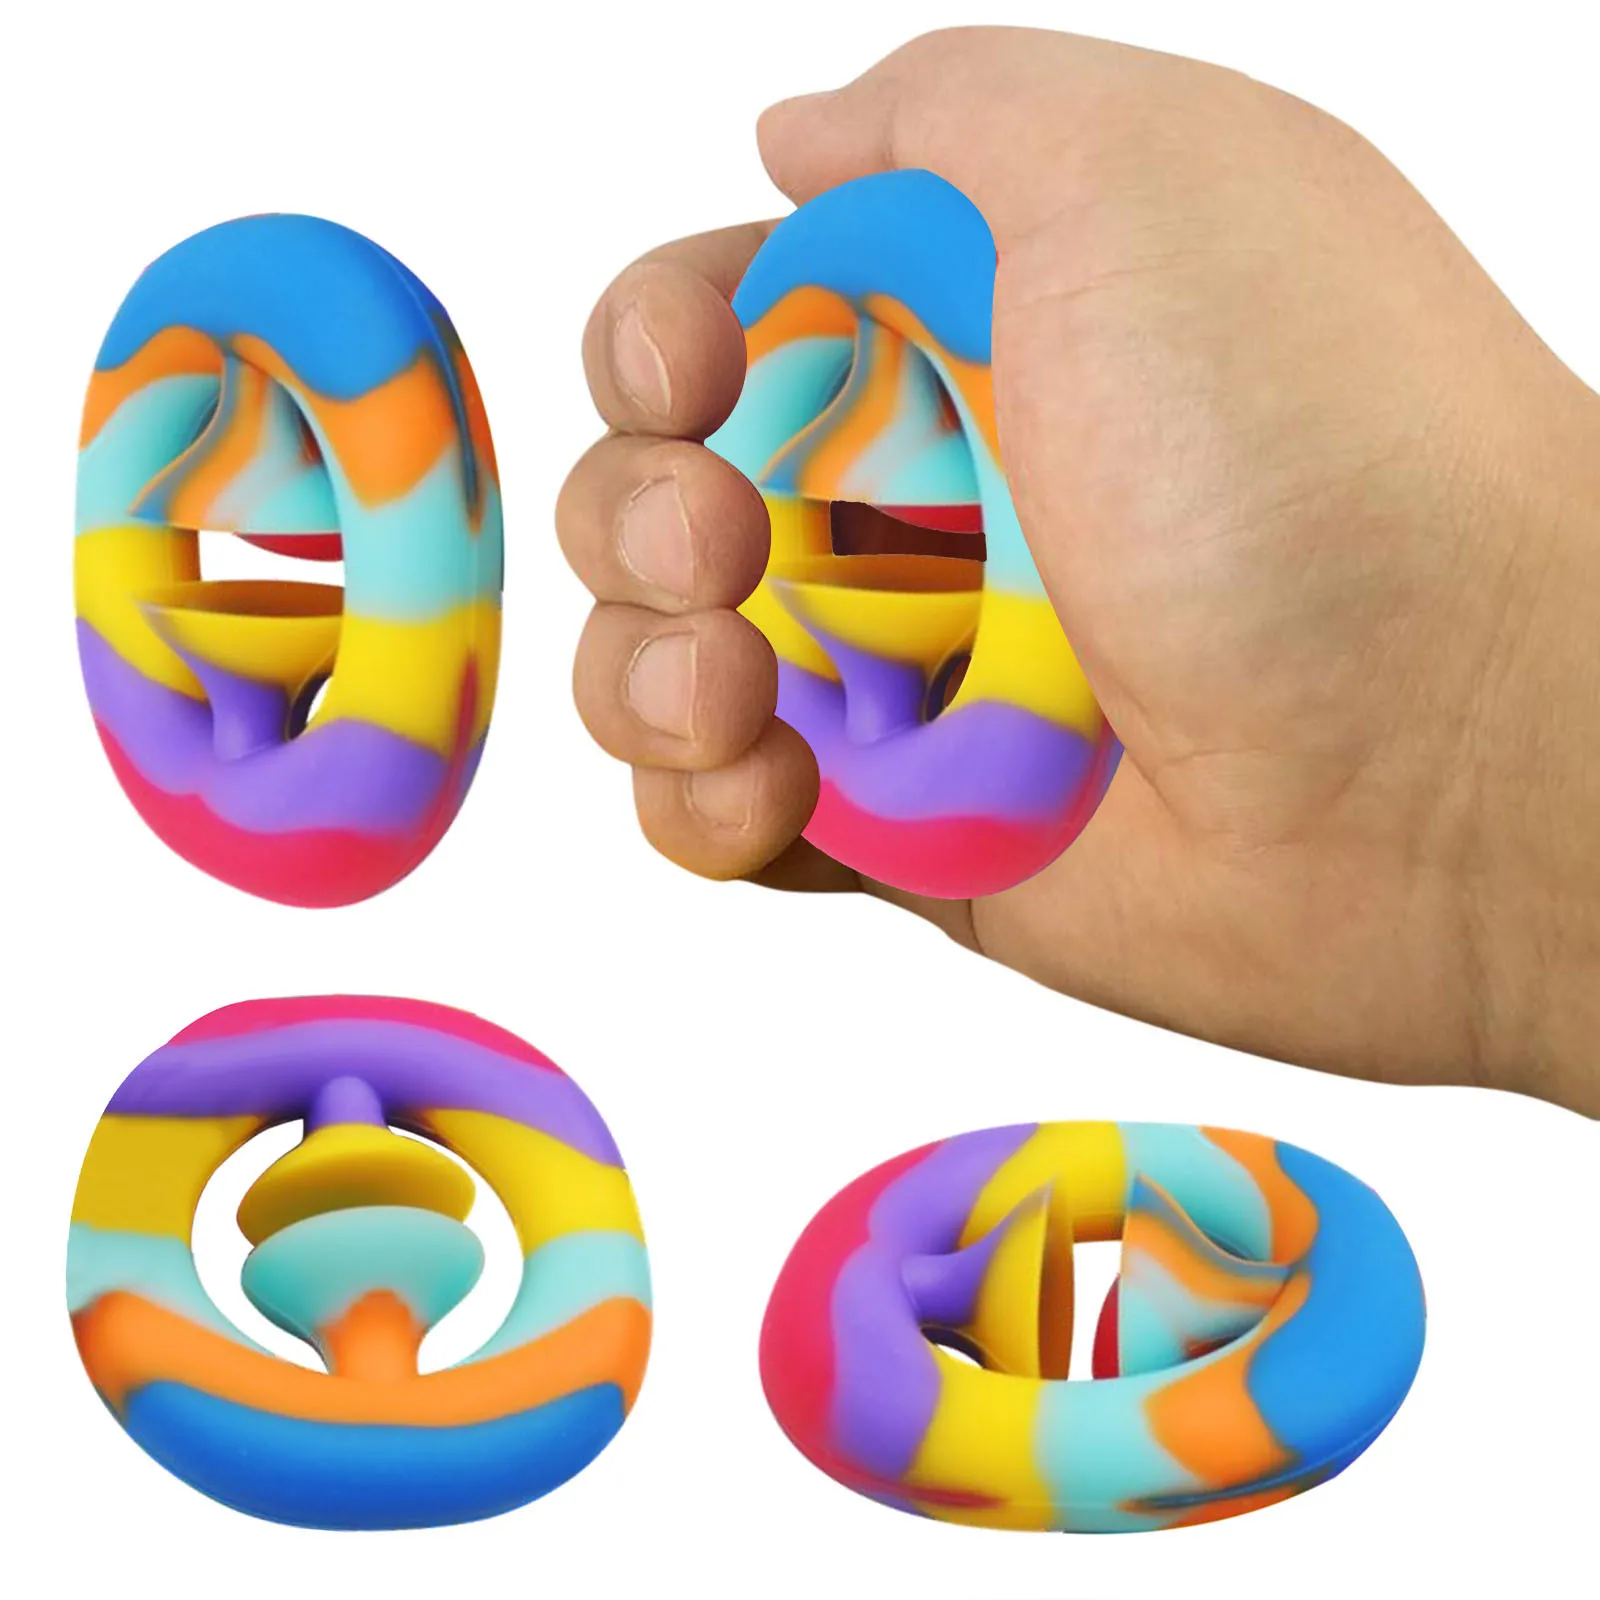 

Decompression Toys Stress Reliever Anxiety Relief Snap-perz Toys Antistress Extrusion Sensory Toy juguete antiestres niÃ±os c1